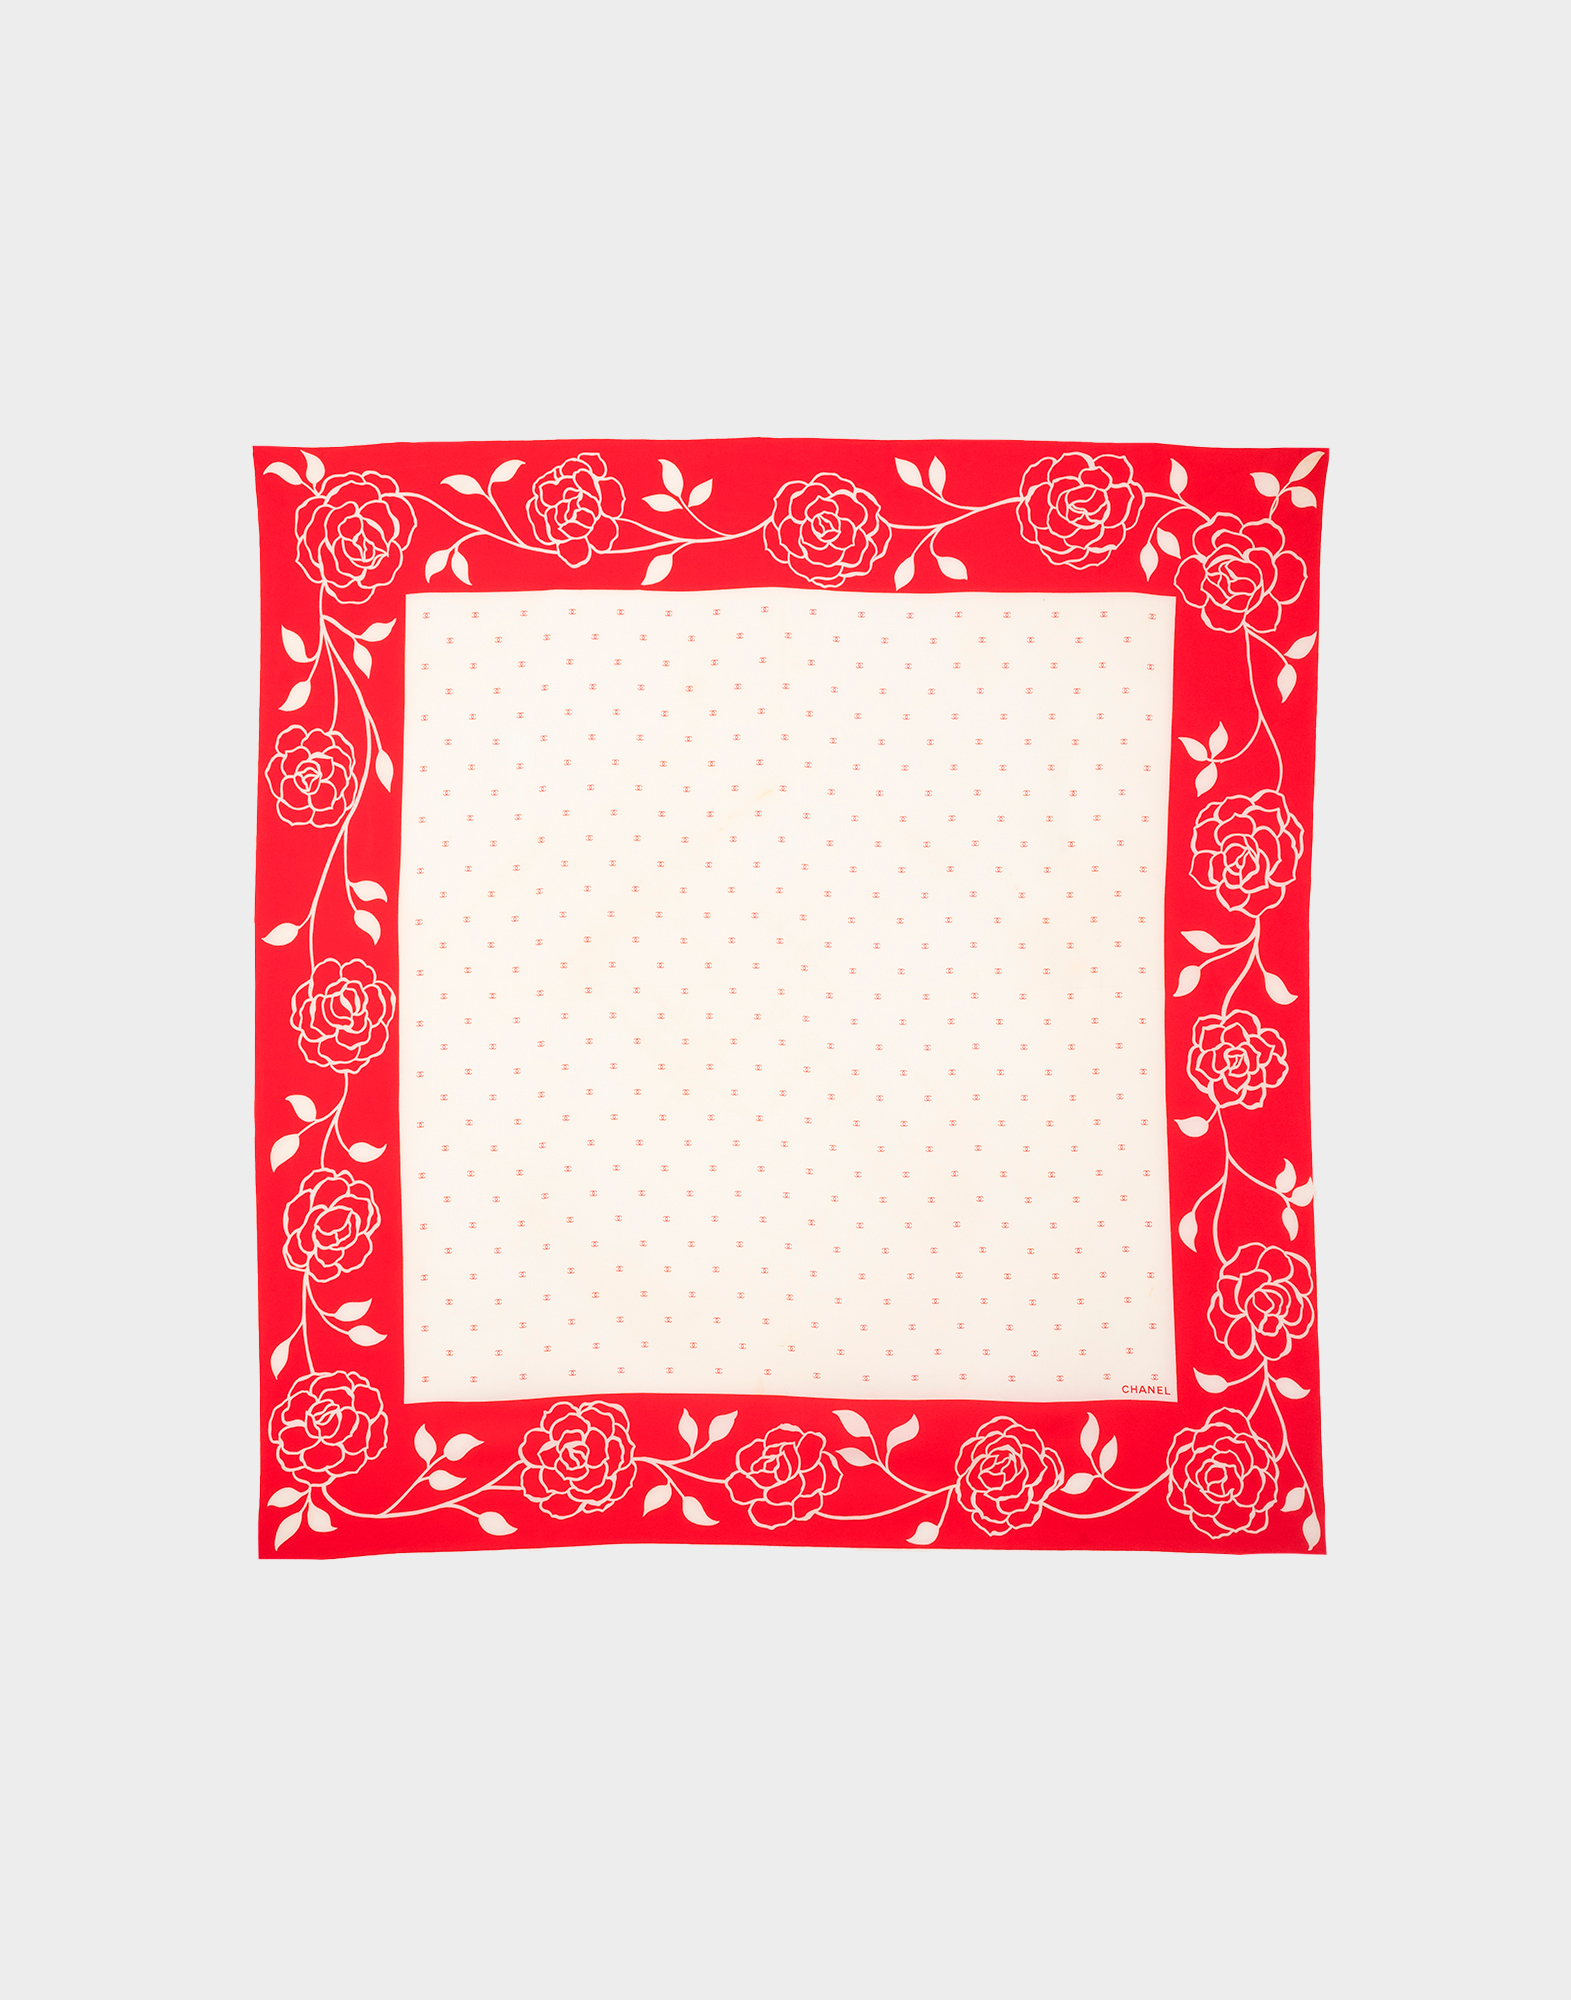 Women's beige silk scarf with a red border and a white floral pattern